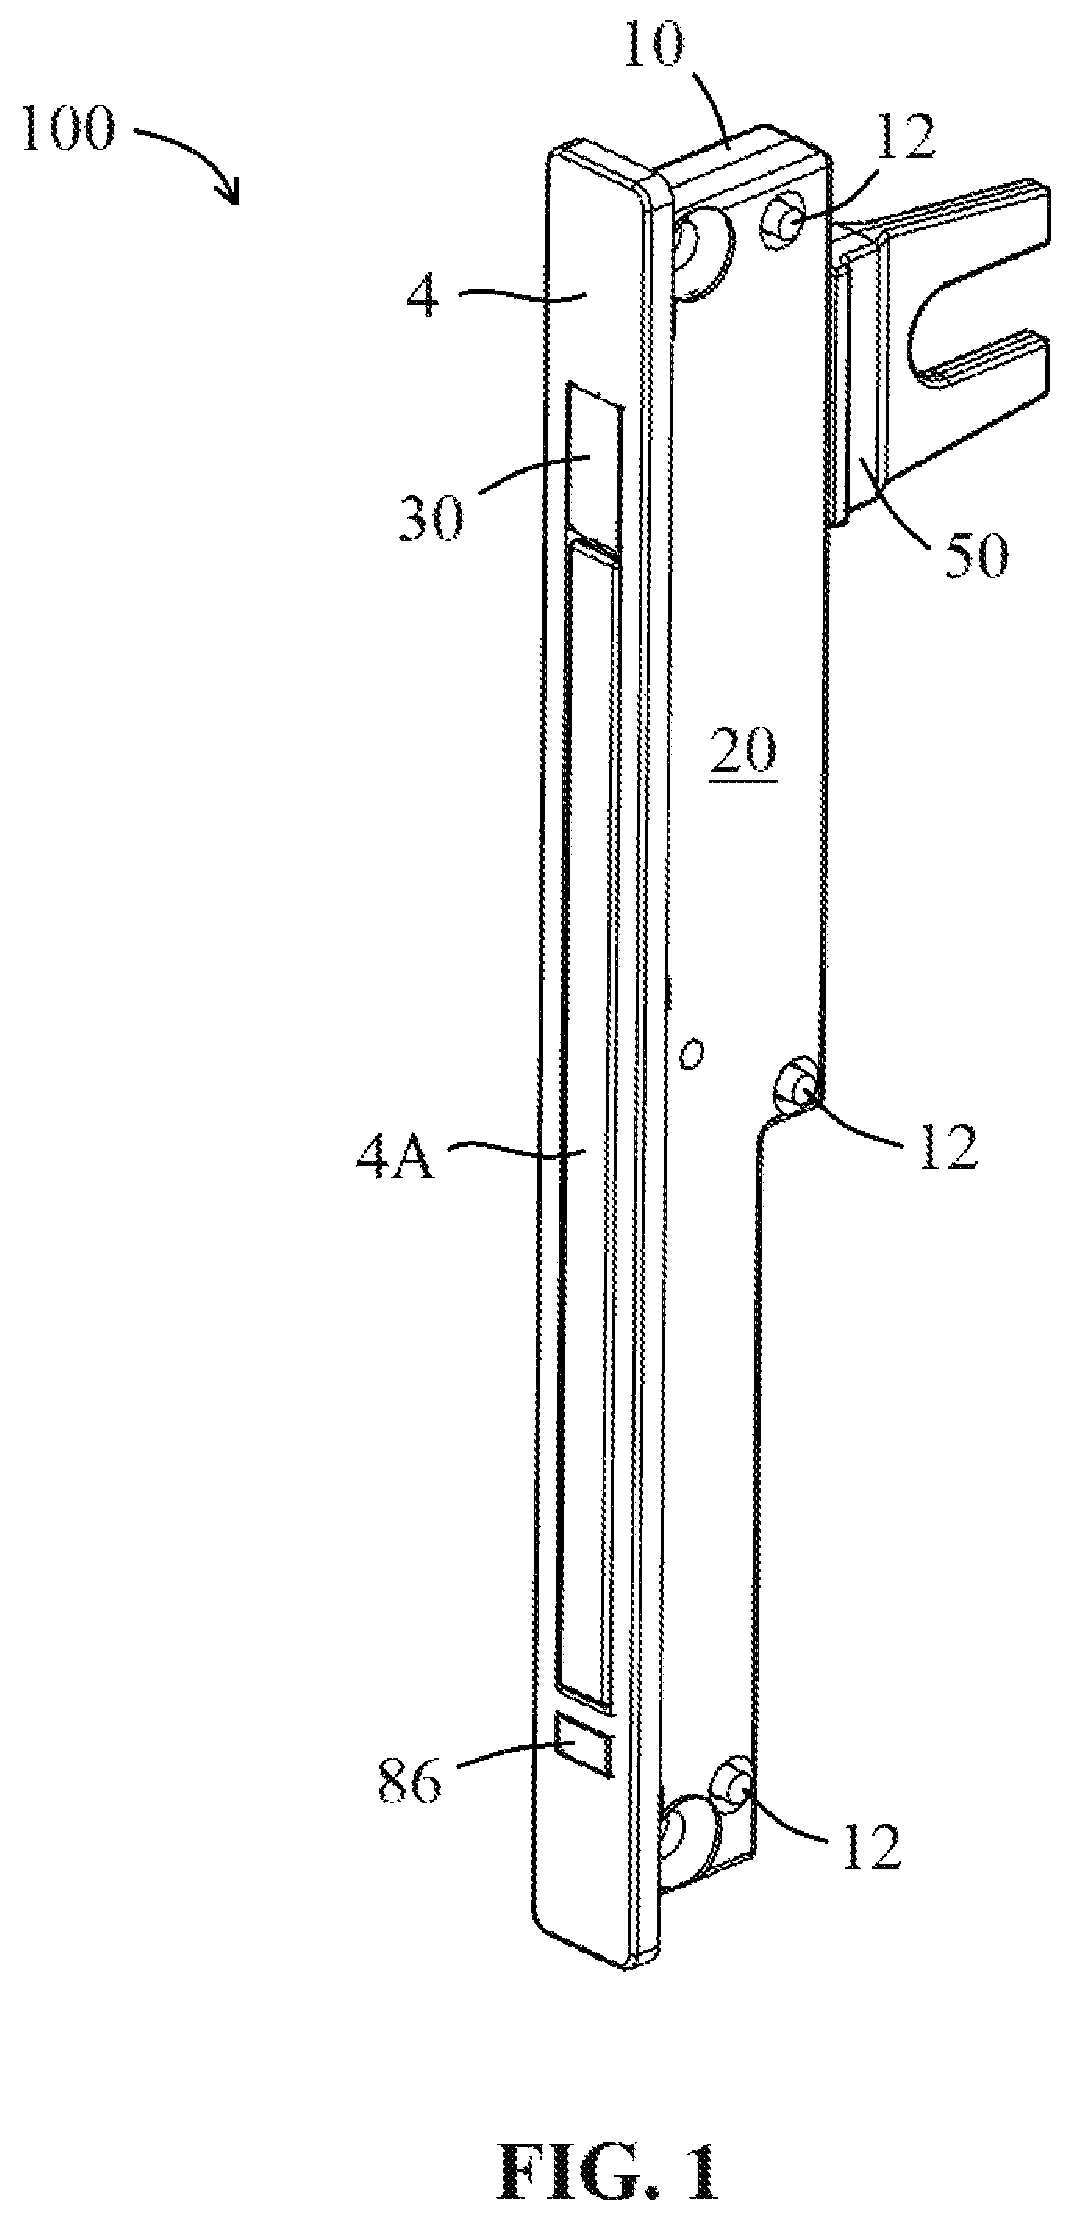 Straight action flush lock for casement window and method of operating the same